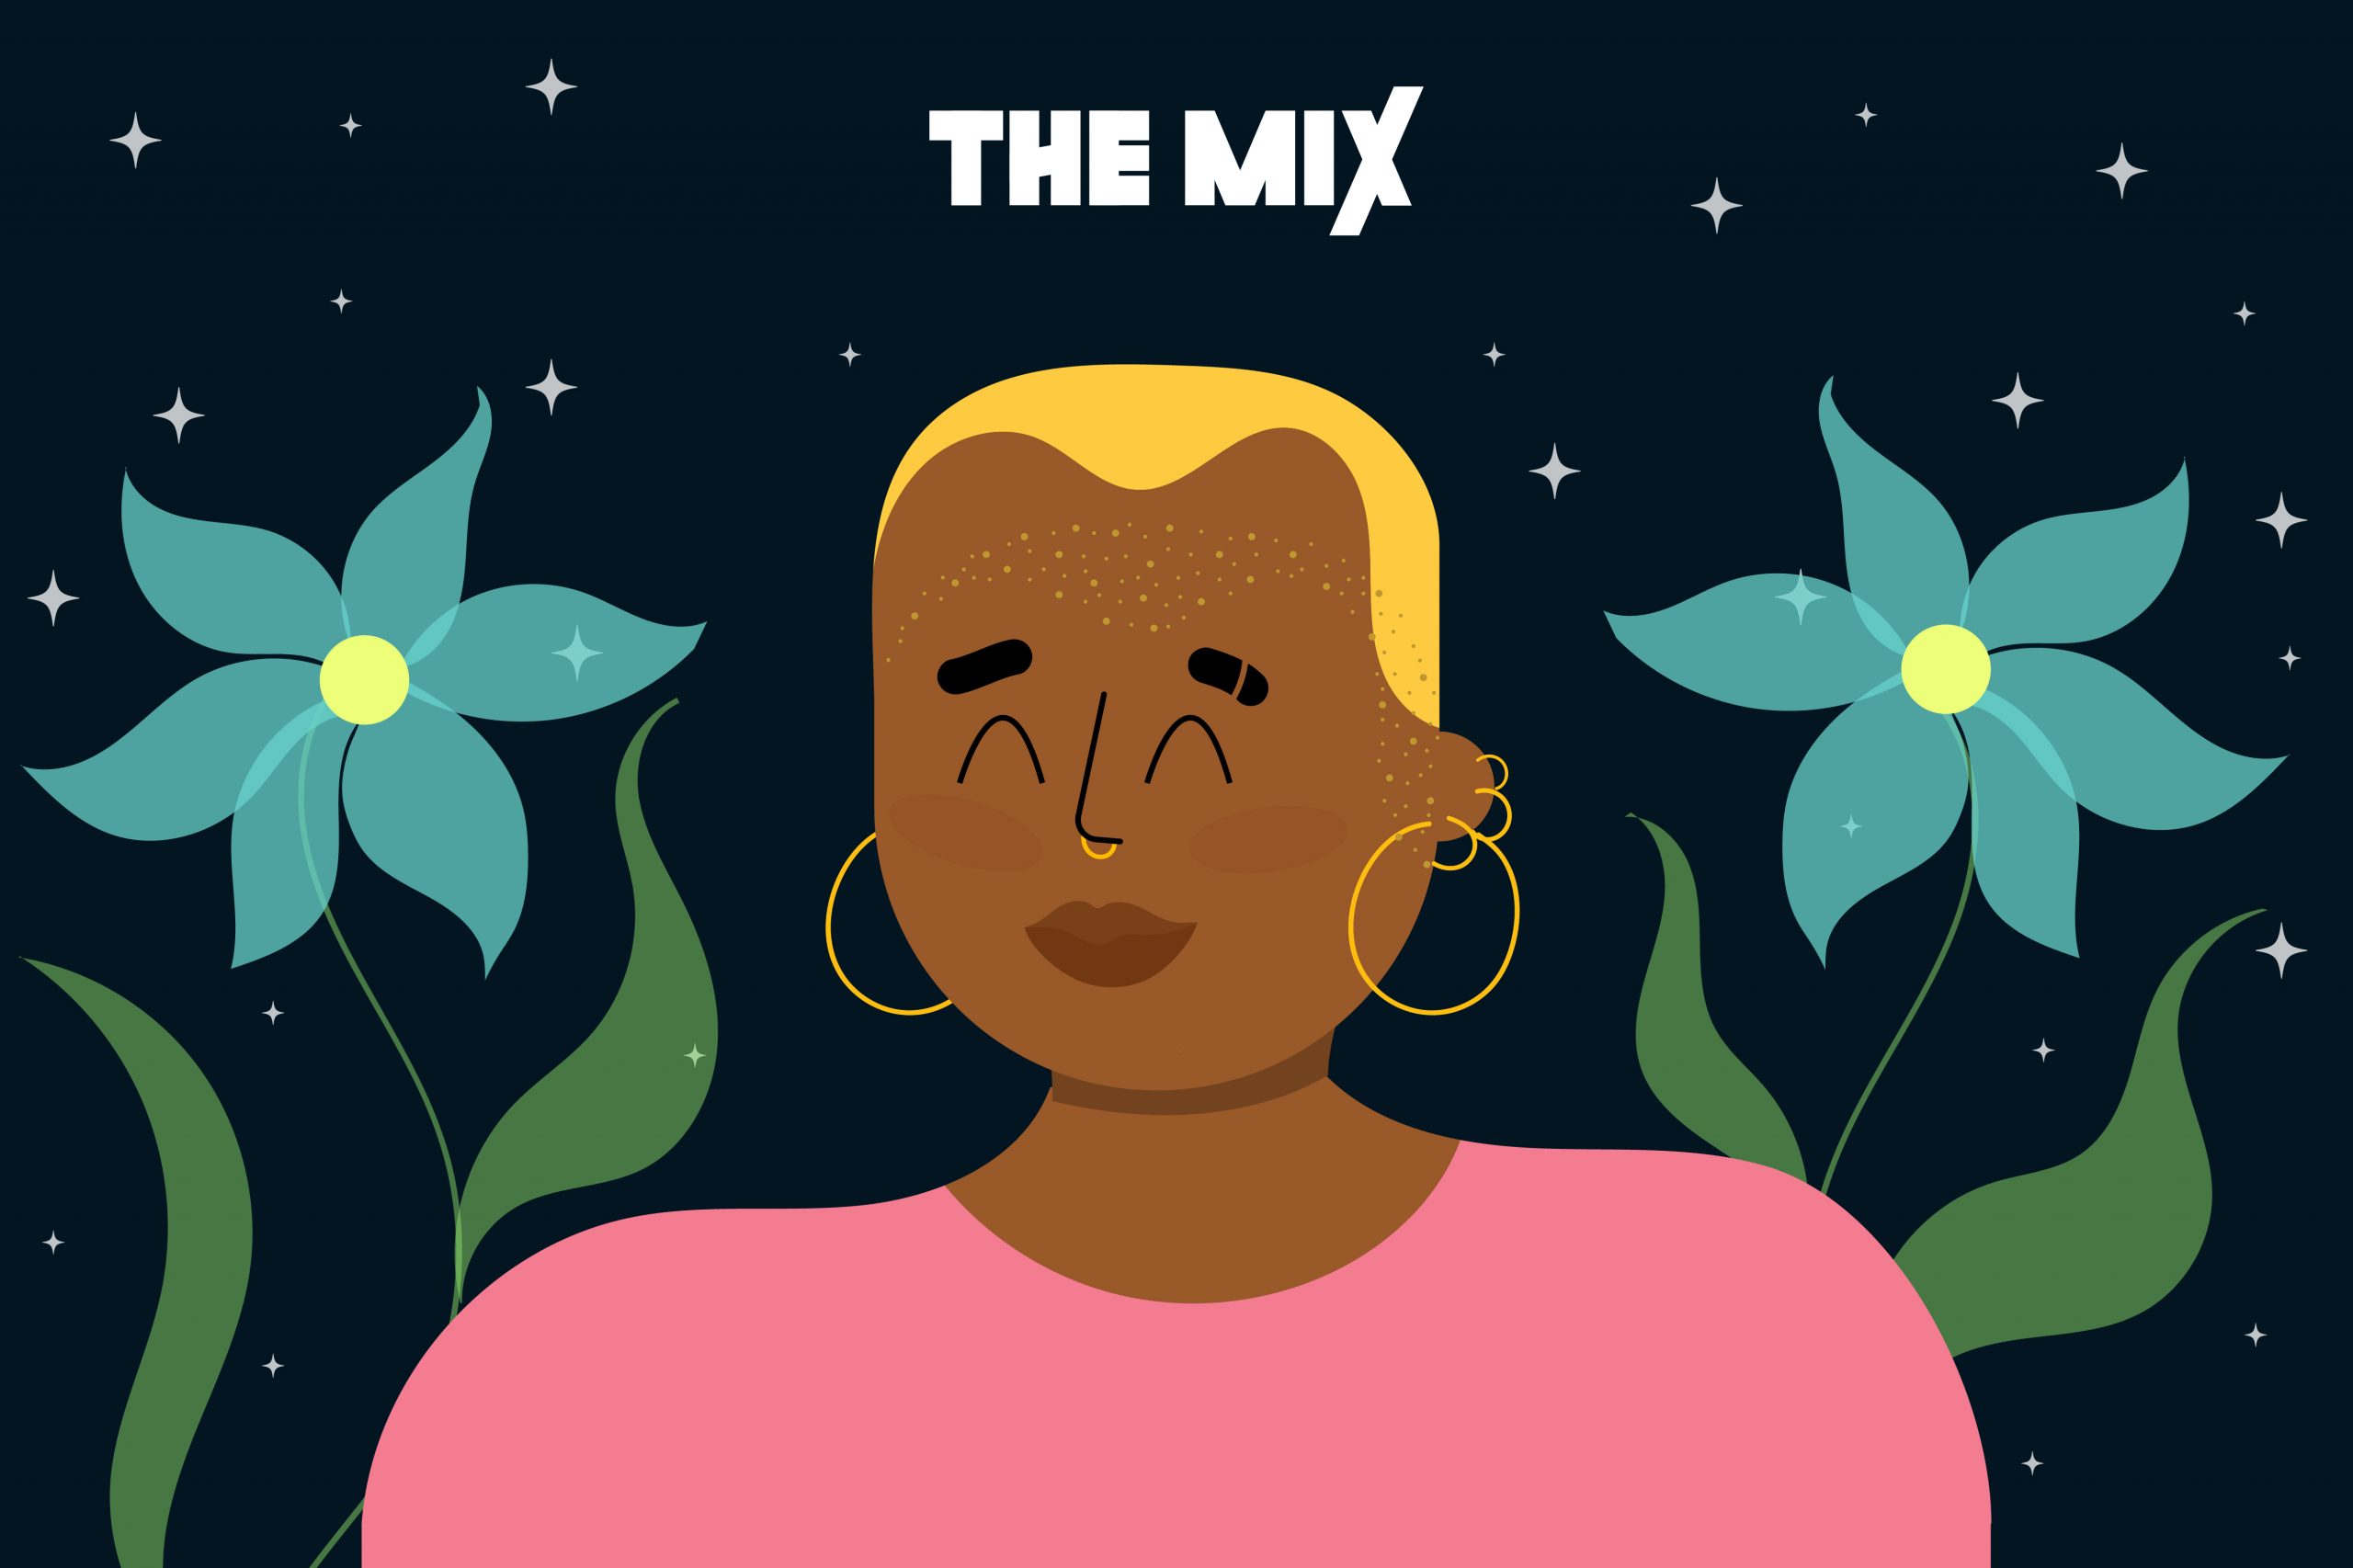 Graphic shows a young person wearing pink with short blonde hair. They are wearing hoop earrings and they are sitting between two blue flowers with a night sky in the background. The image represents coming out as Non-Binary.